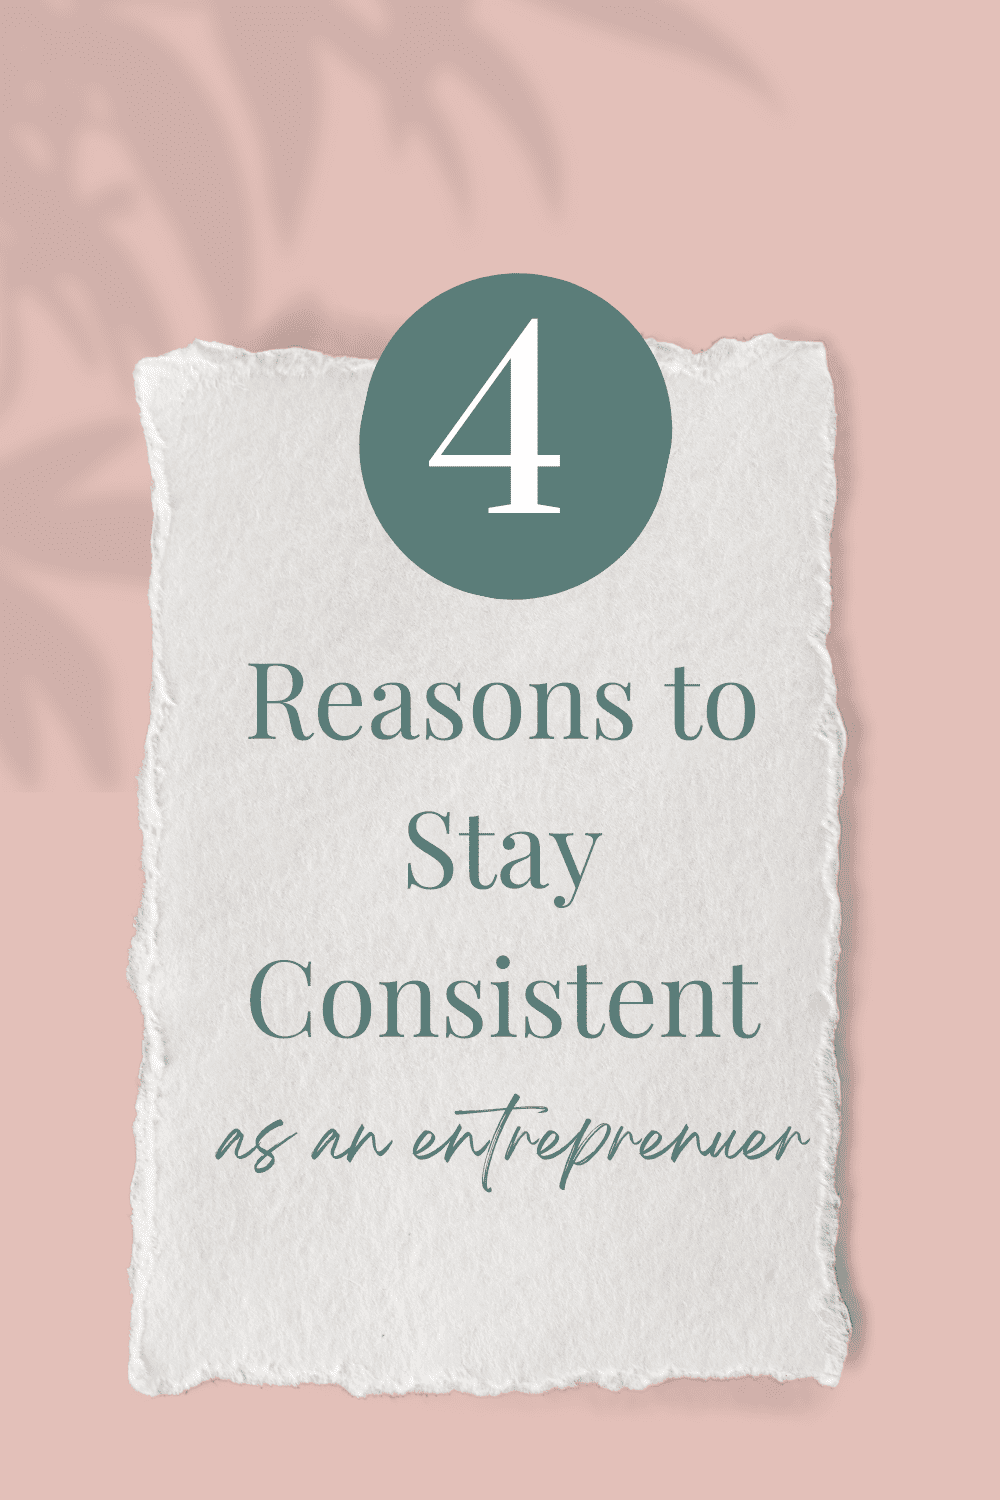 Graphic that says "4 Reasons to stay consistent as an entrepreneur"